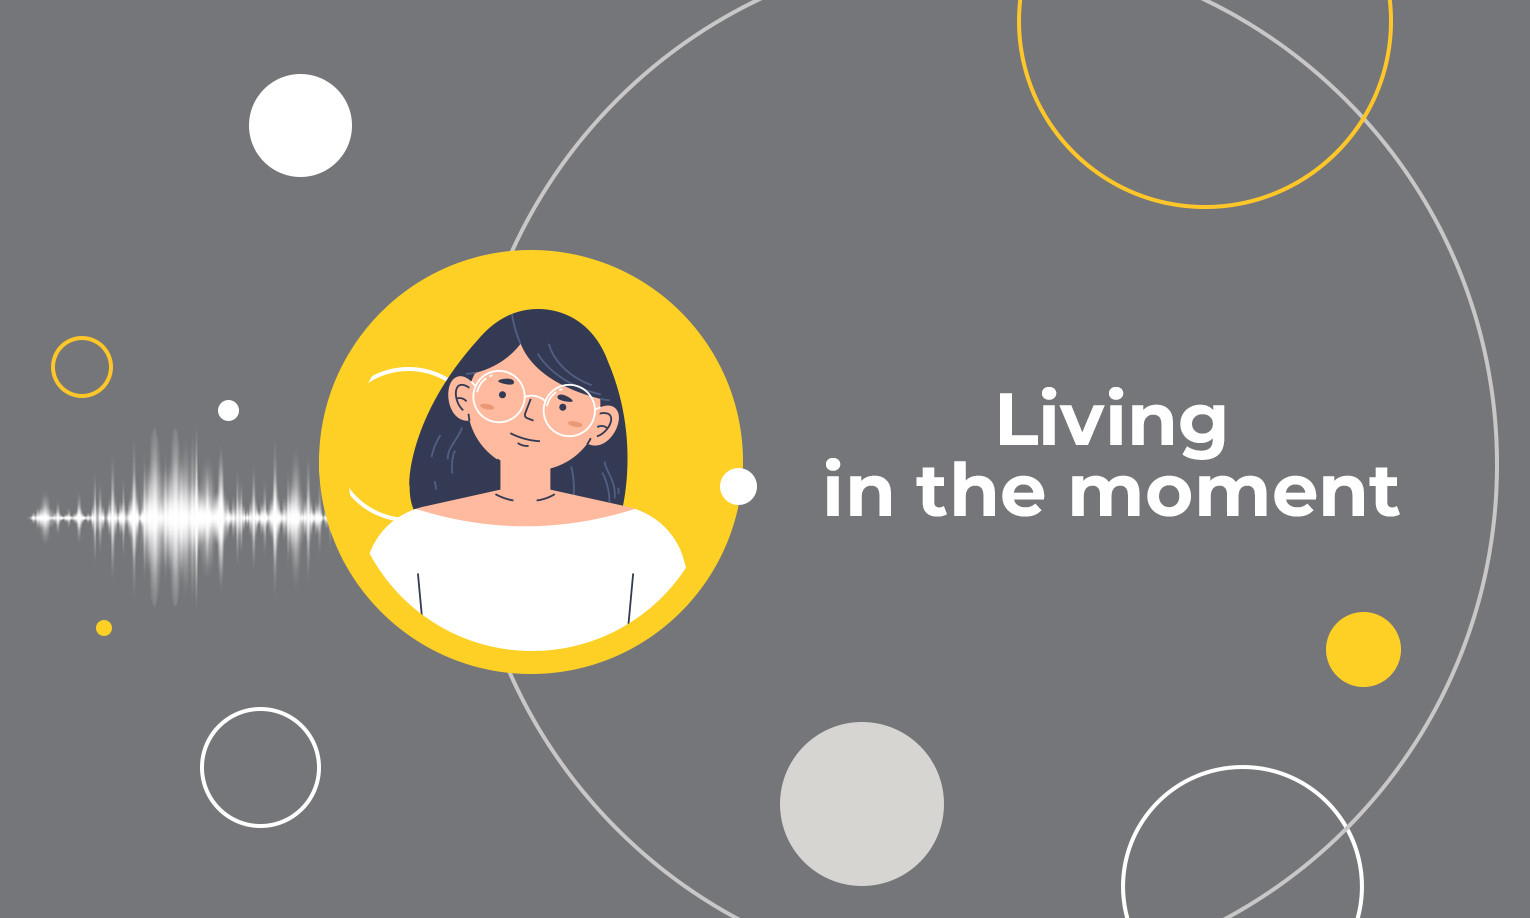 Living in the moment – mindfulness. Why does each of us need mindfulness?